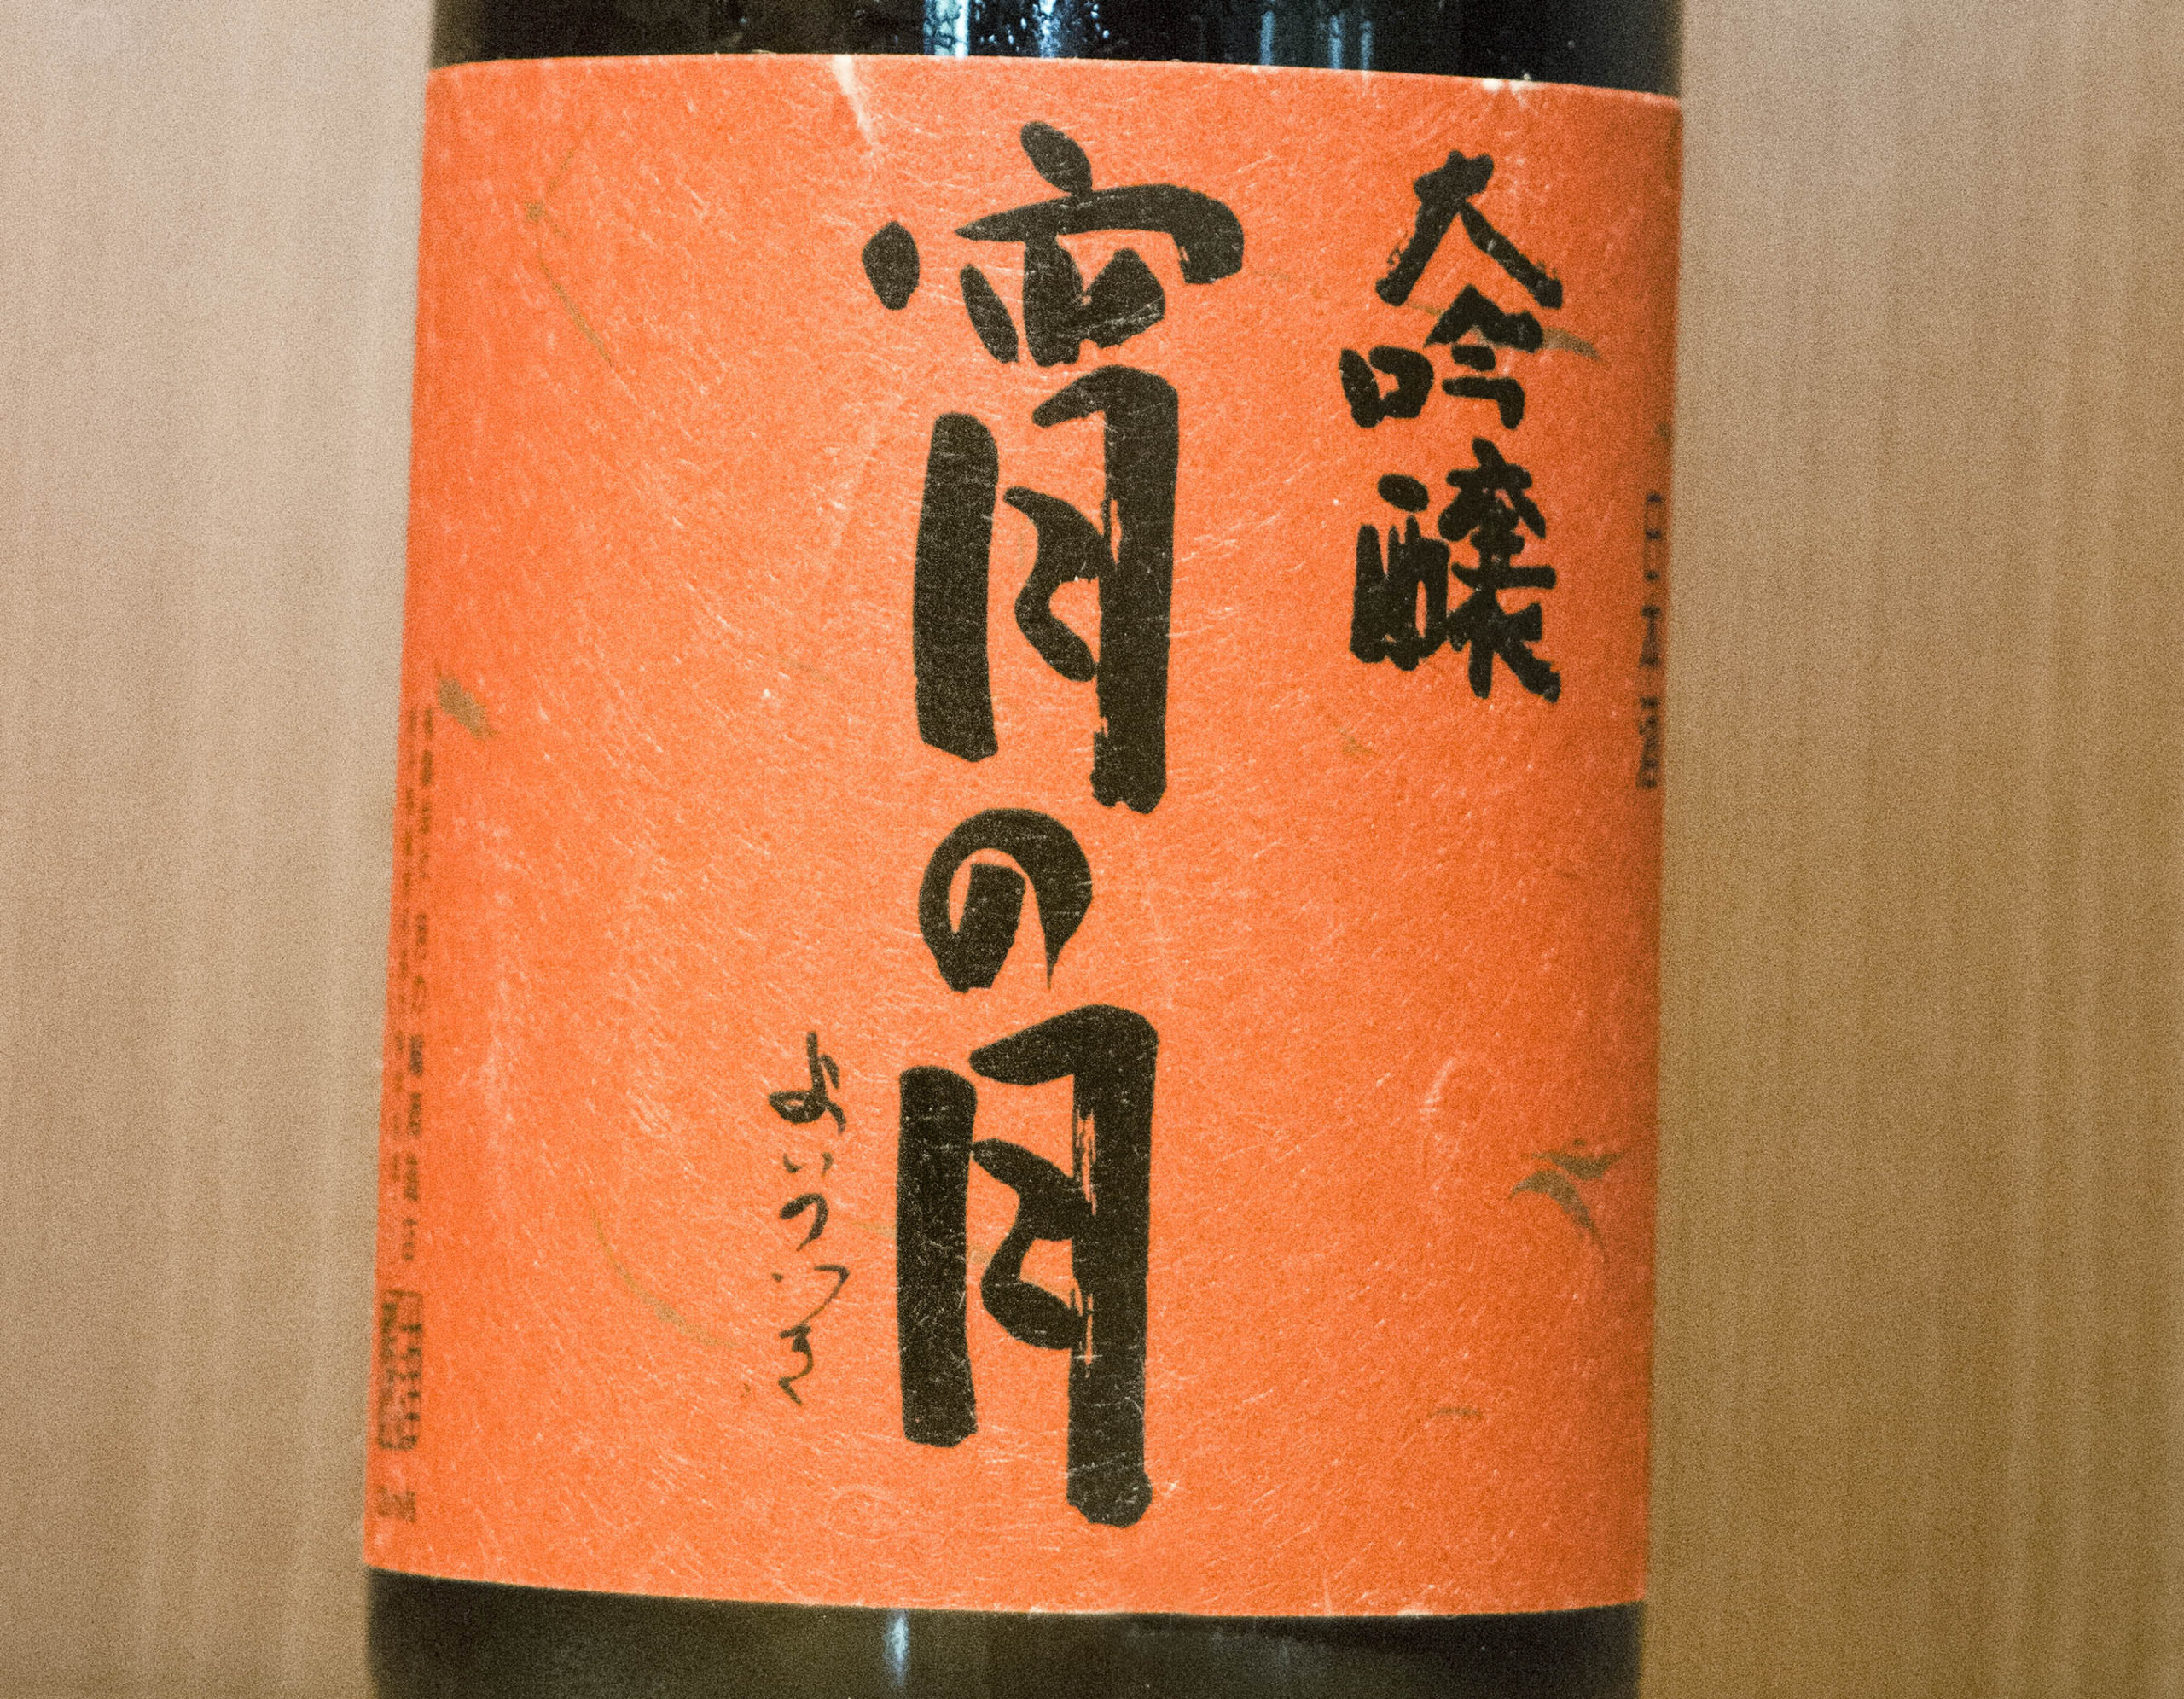 A close-up of the label from Yoi no Tsuki Daiginjo "Midnight Moon".